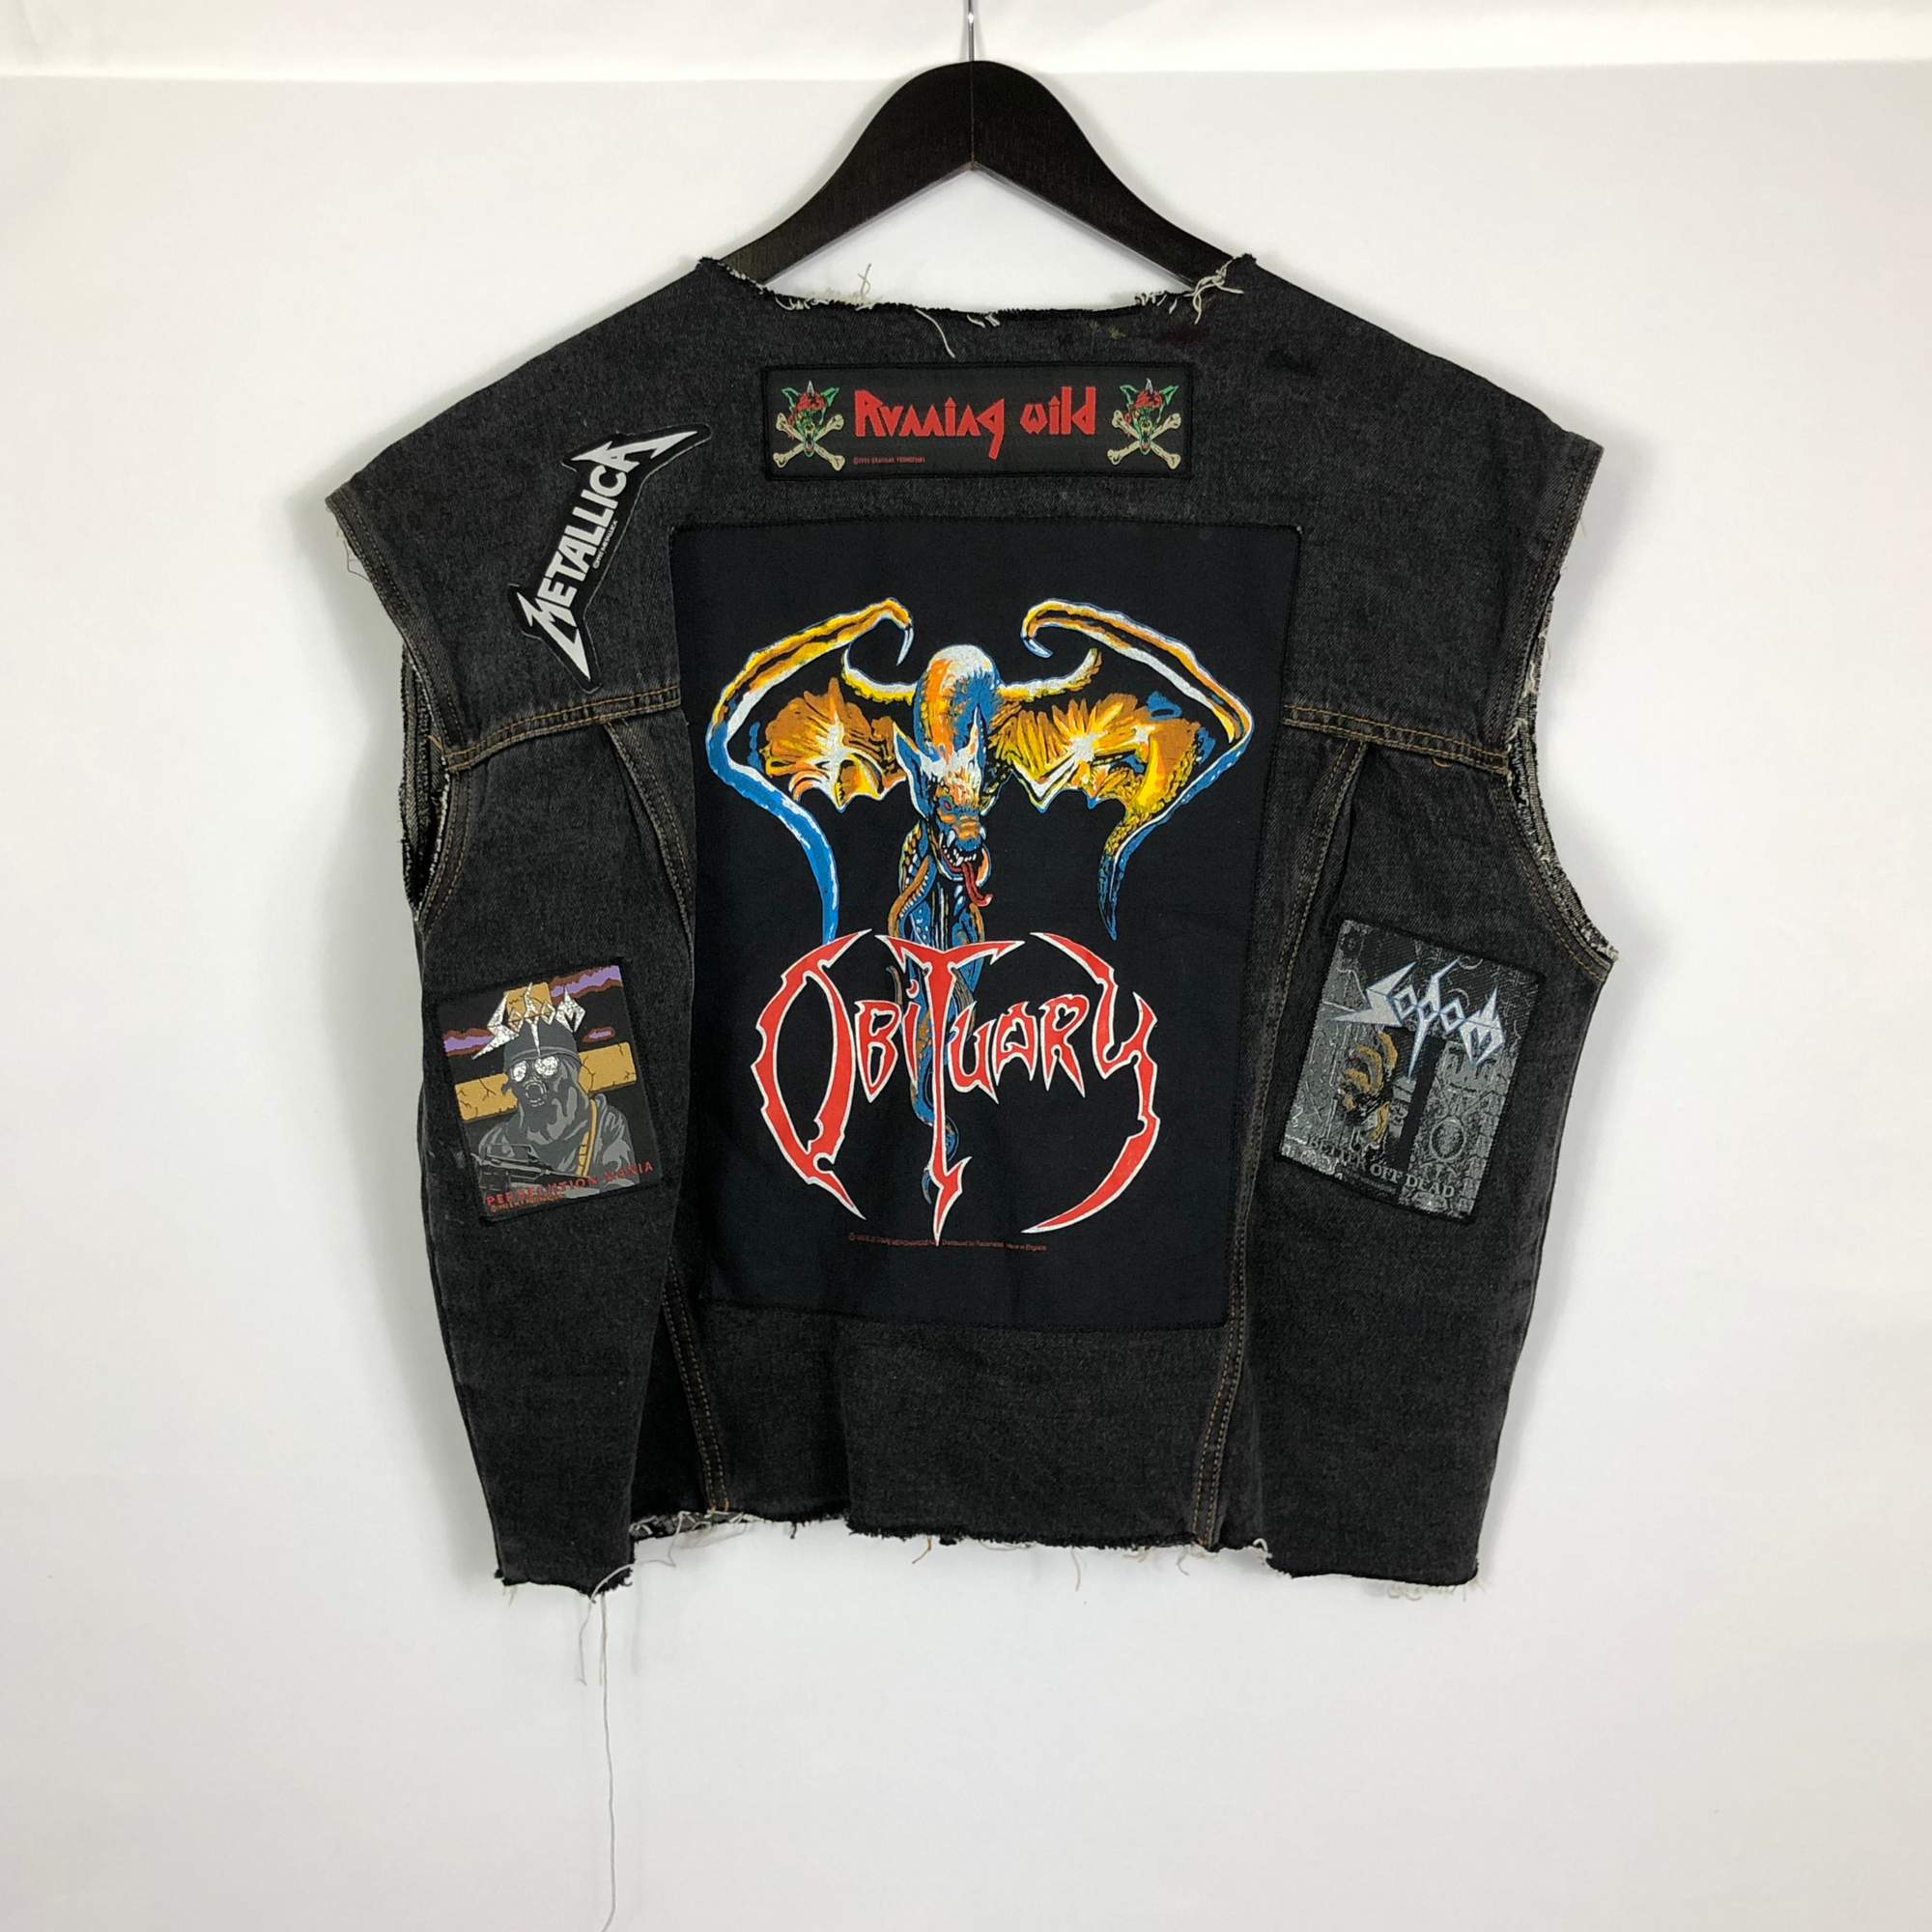 VINTAGE DENIM VEST WITH Gothic & ROCK BAND EMBROIDERED PATCHES - MEN'S Large/ WOMEN'S XL